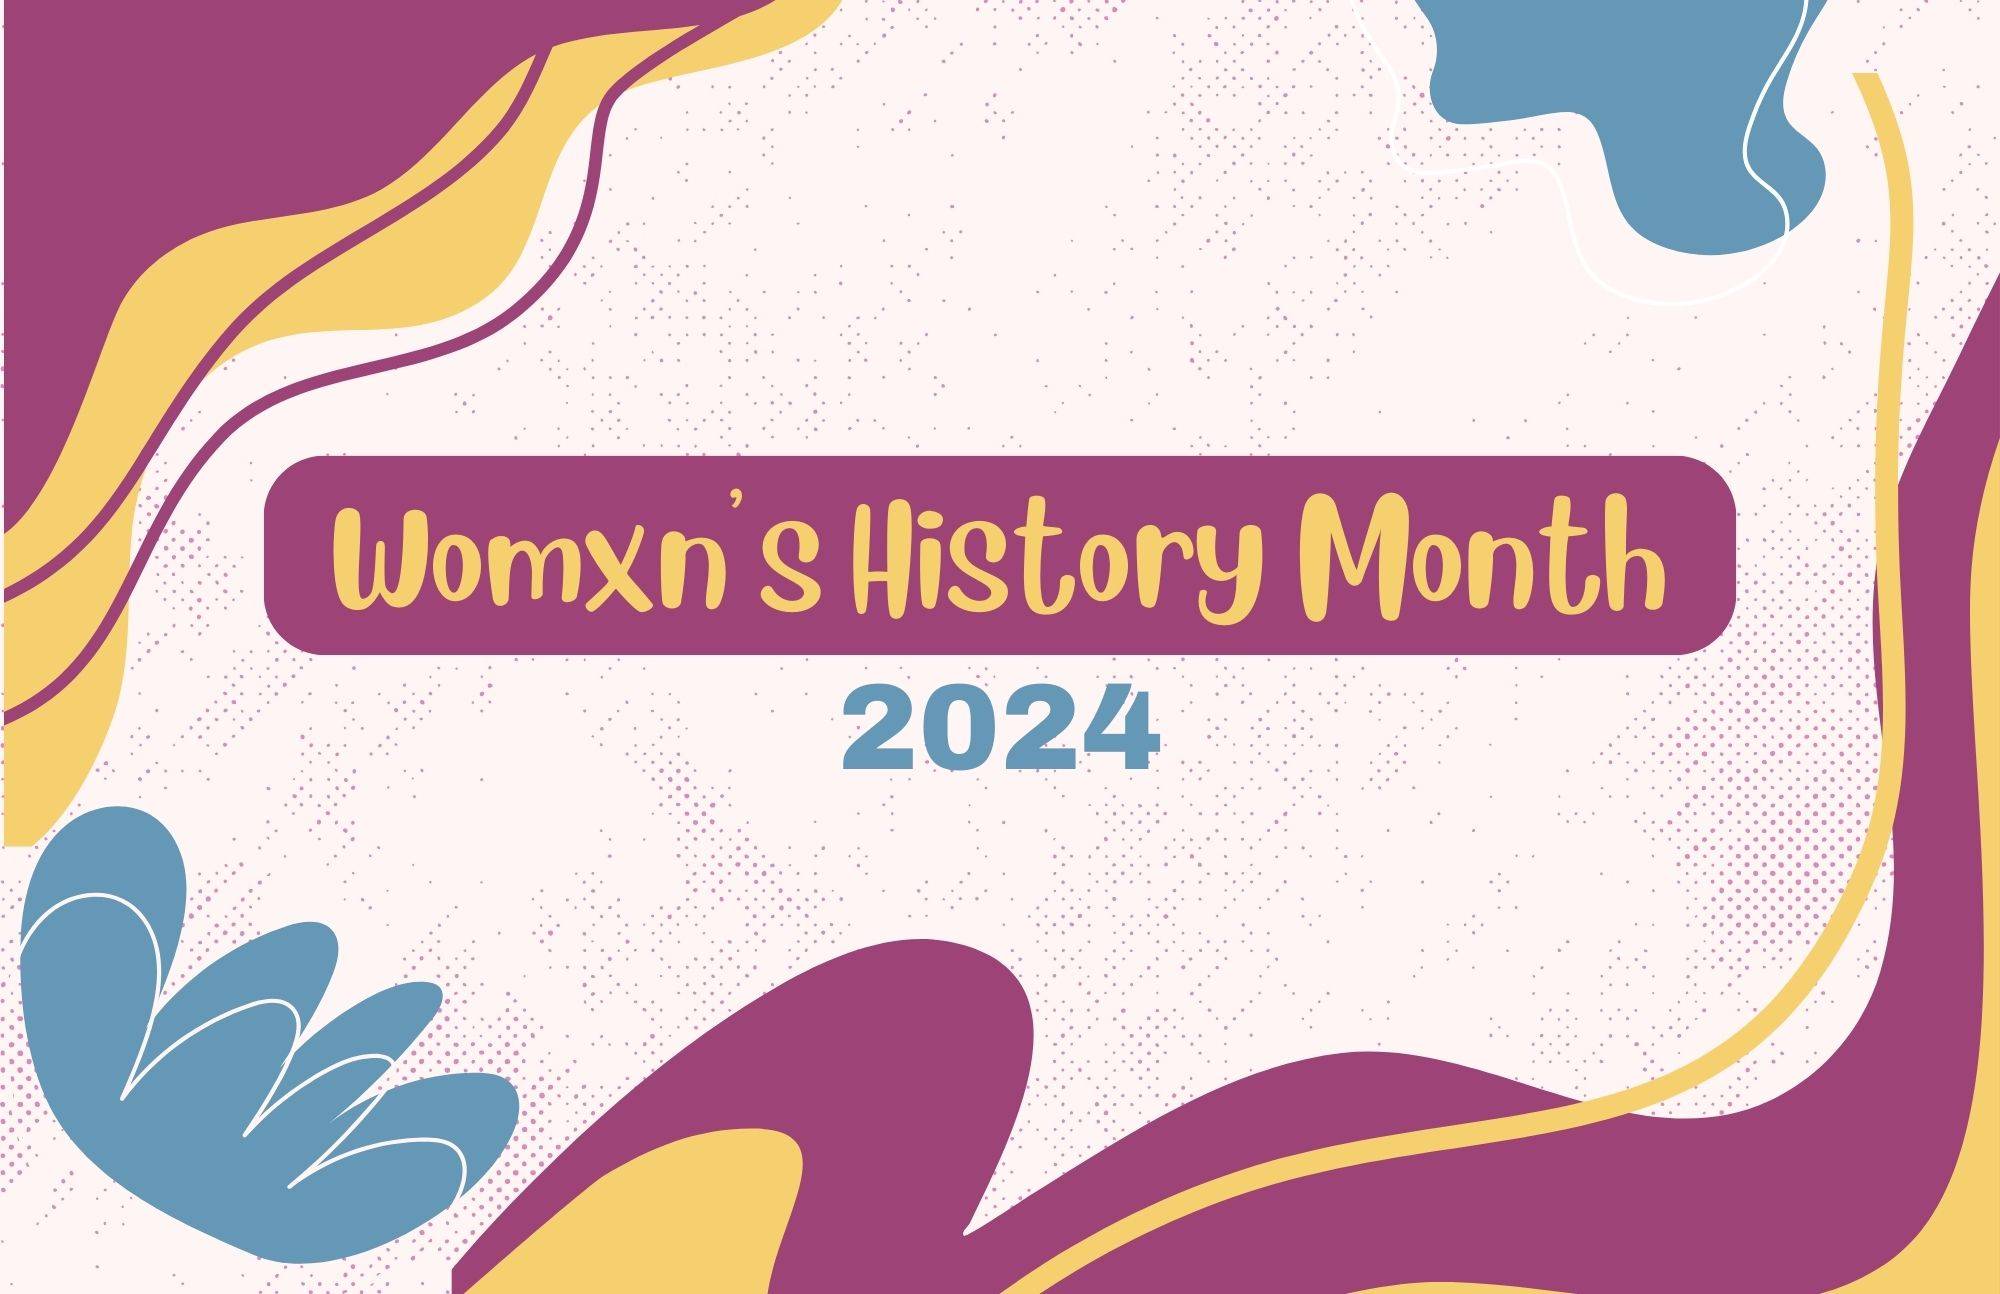 womxns history month 2024 landing page image